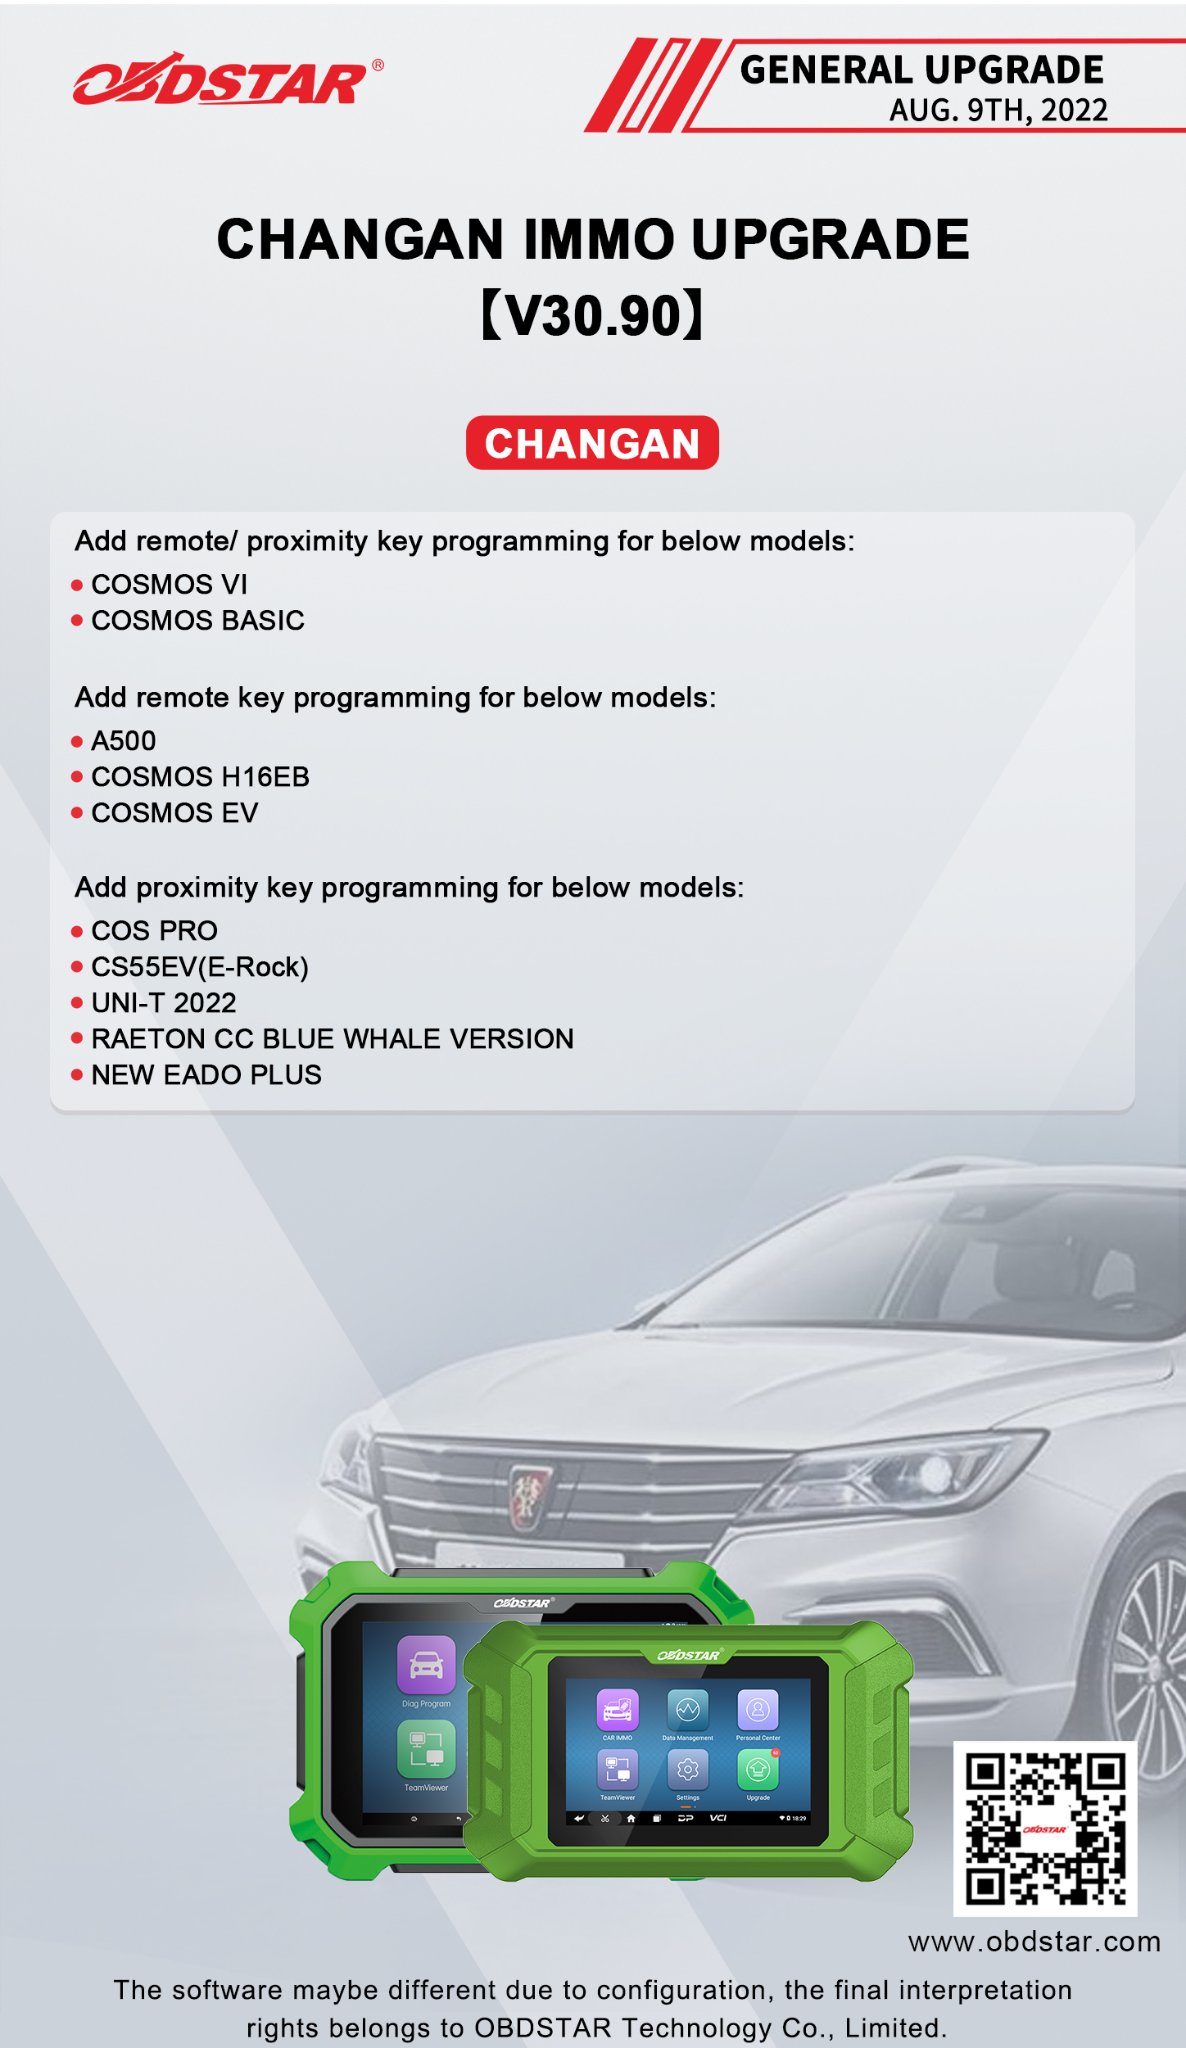 CHANGAN V30.90 IMMO Upgrade on OBDSTAR X300 DP Plus and X300 DP and X300 Pro4